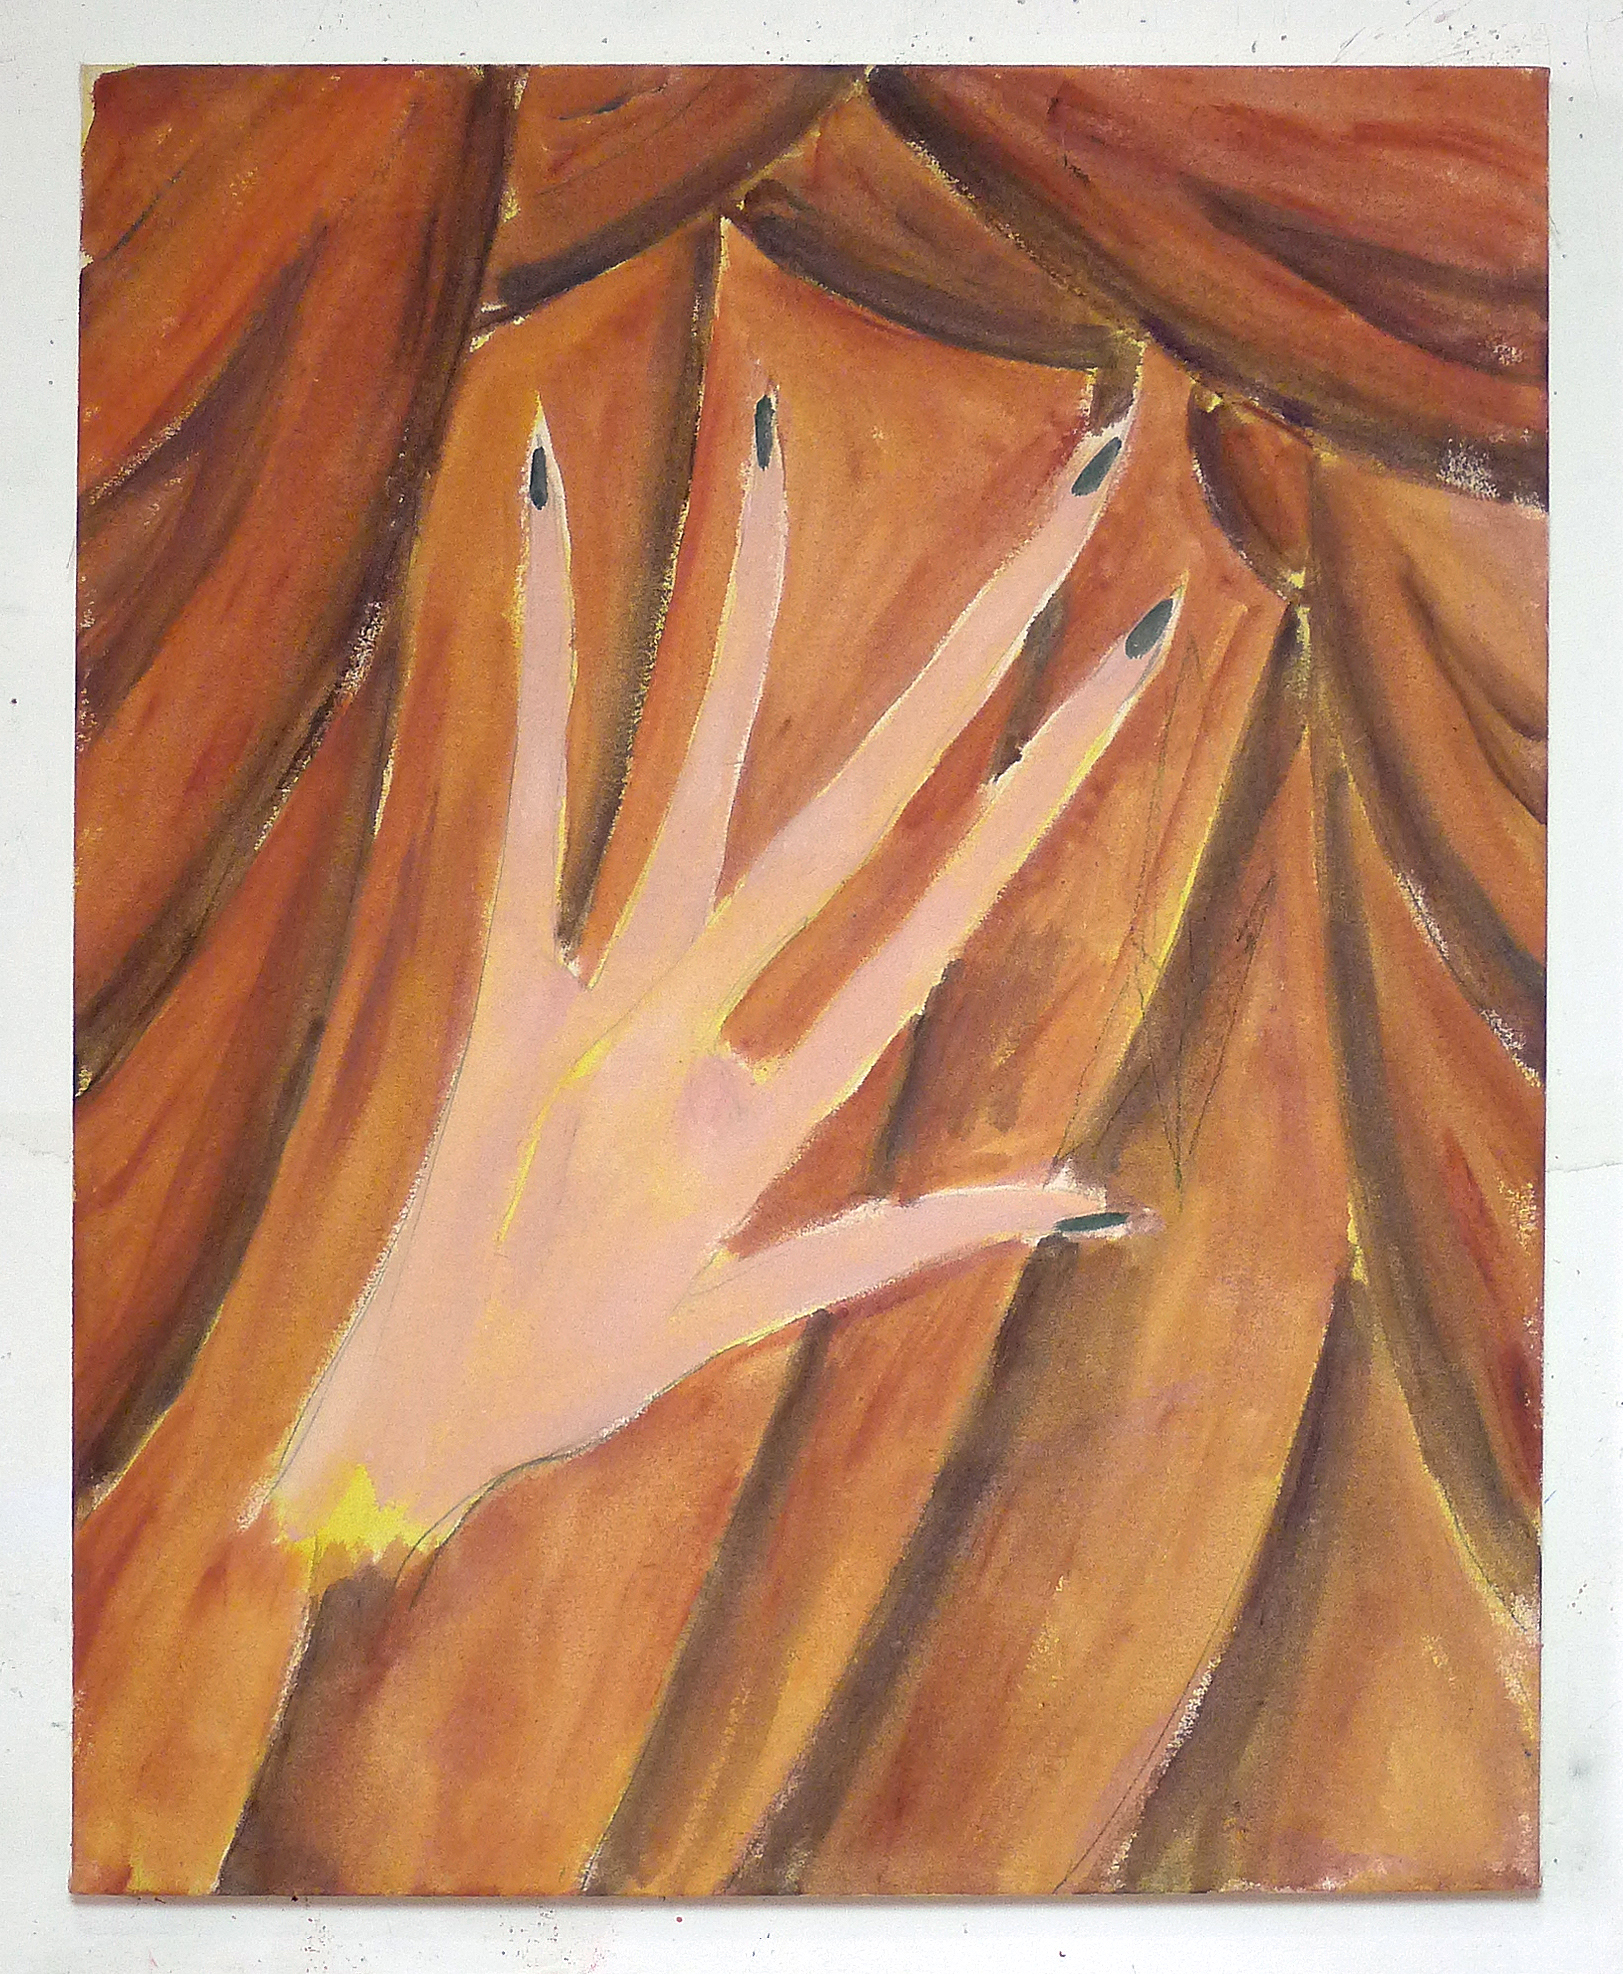 david_armacost-08_UNTITLED_BROWN_CURTAIN_2015_ACRYLIC_ON_CANVAS